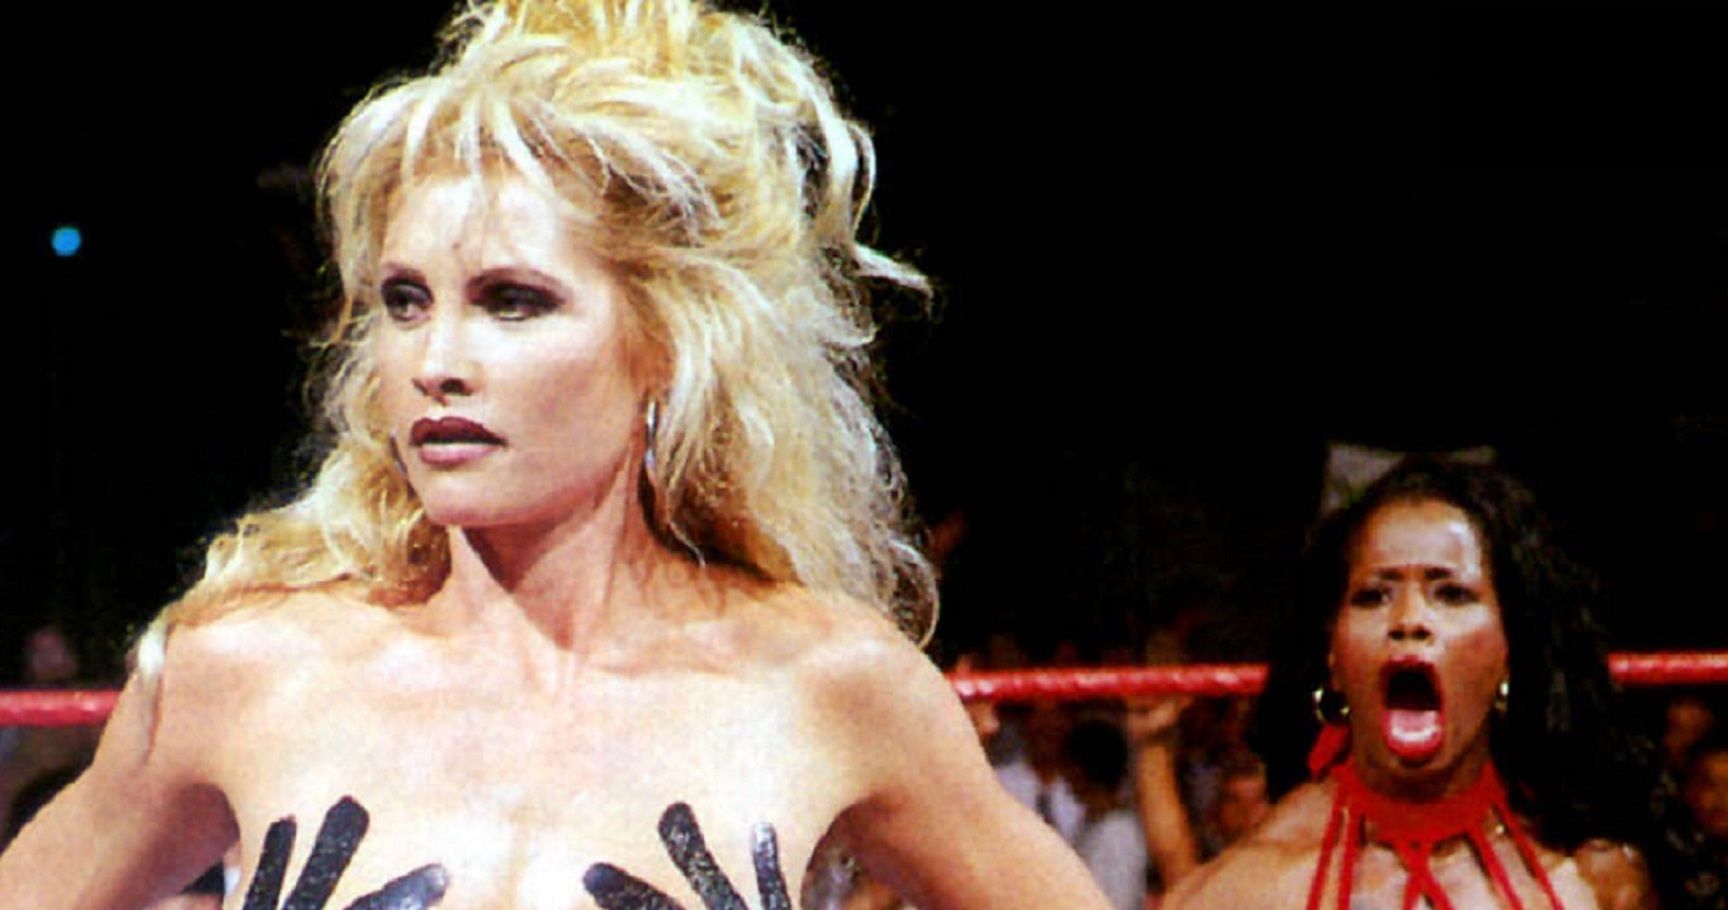 Top 18 Moments of Nudity in Wrestling.